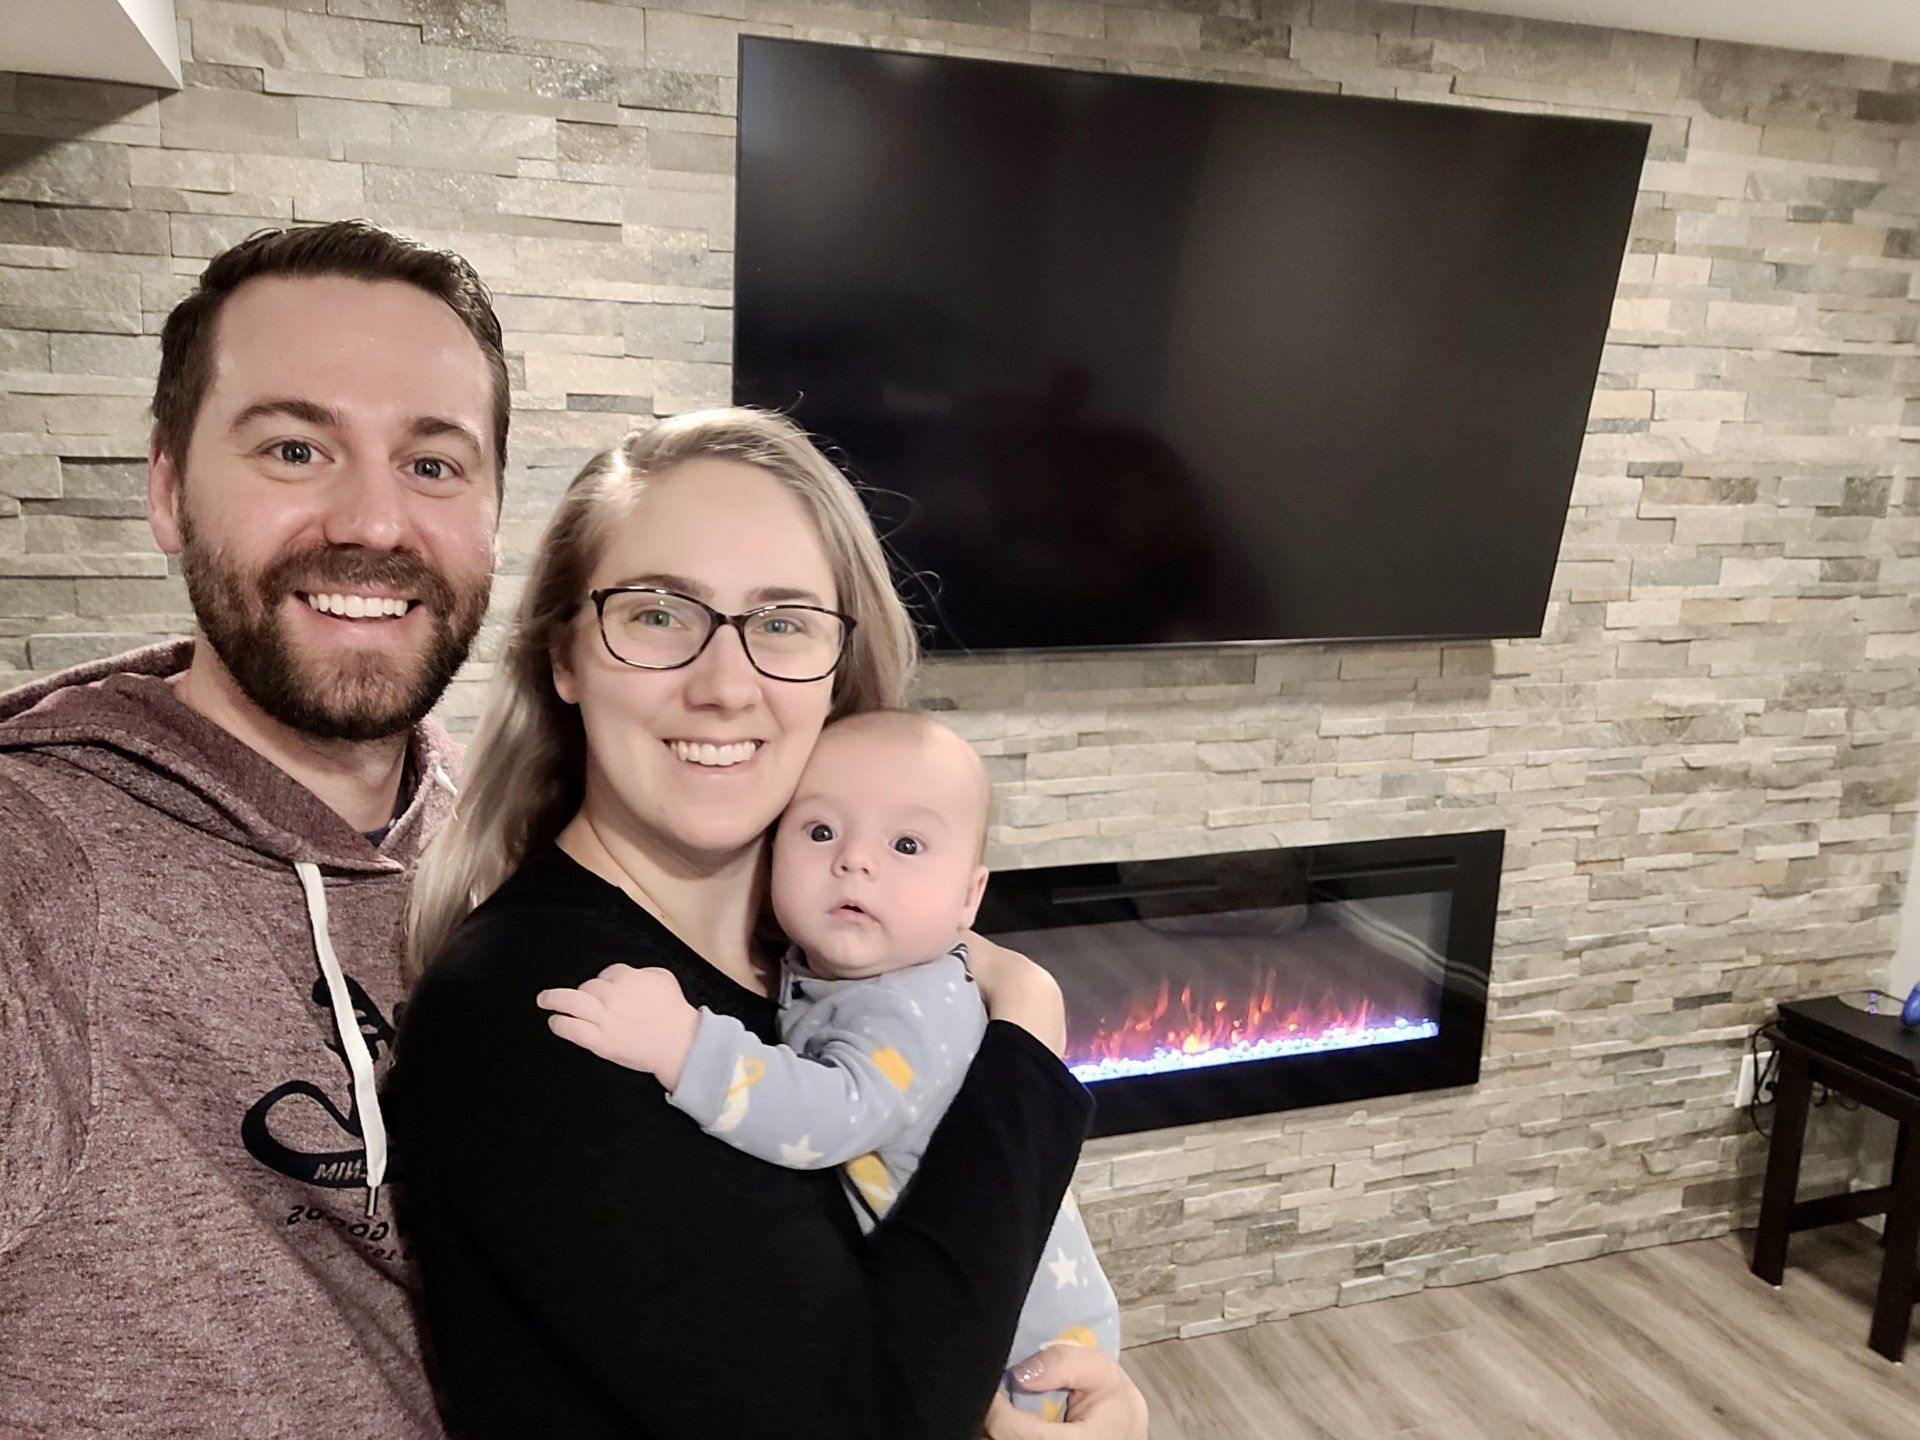 Eddie, Jennifer and baby in their newly renovated basement where Nichols Electric did the electrical